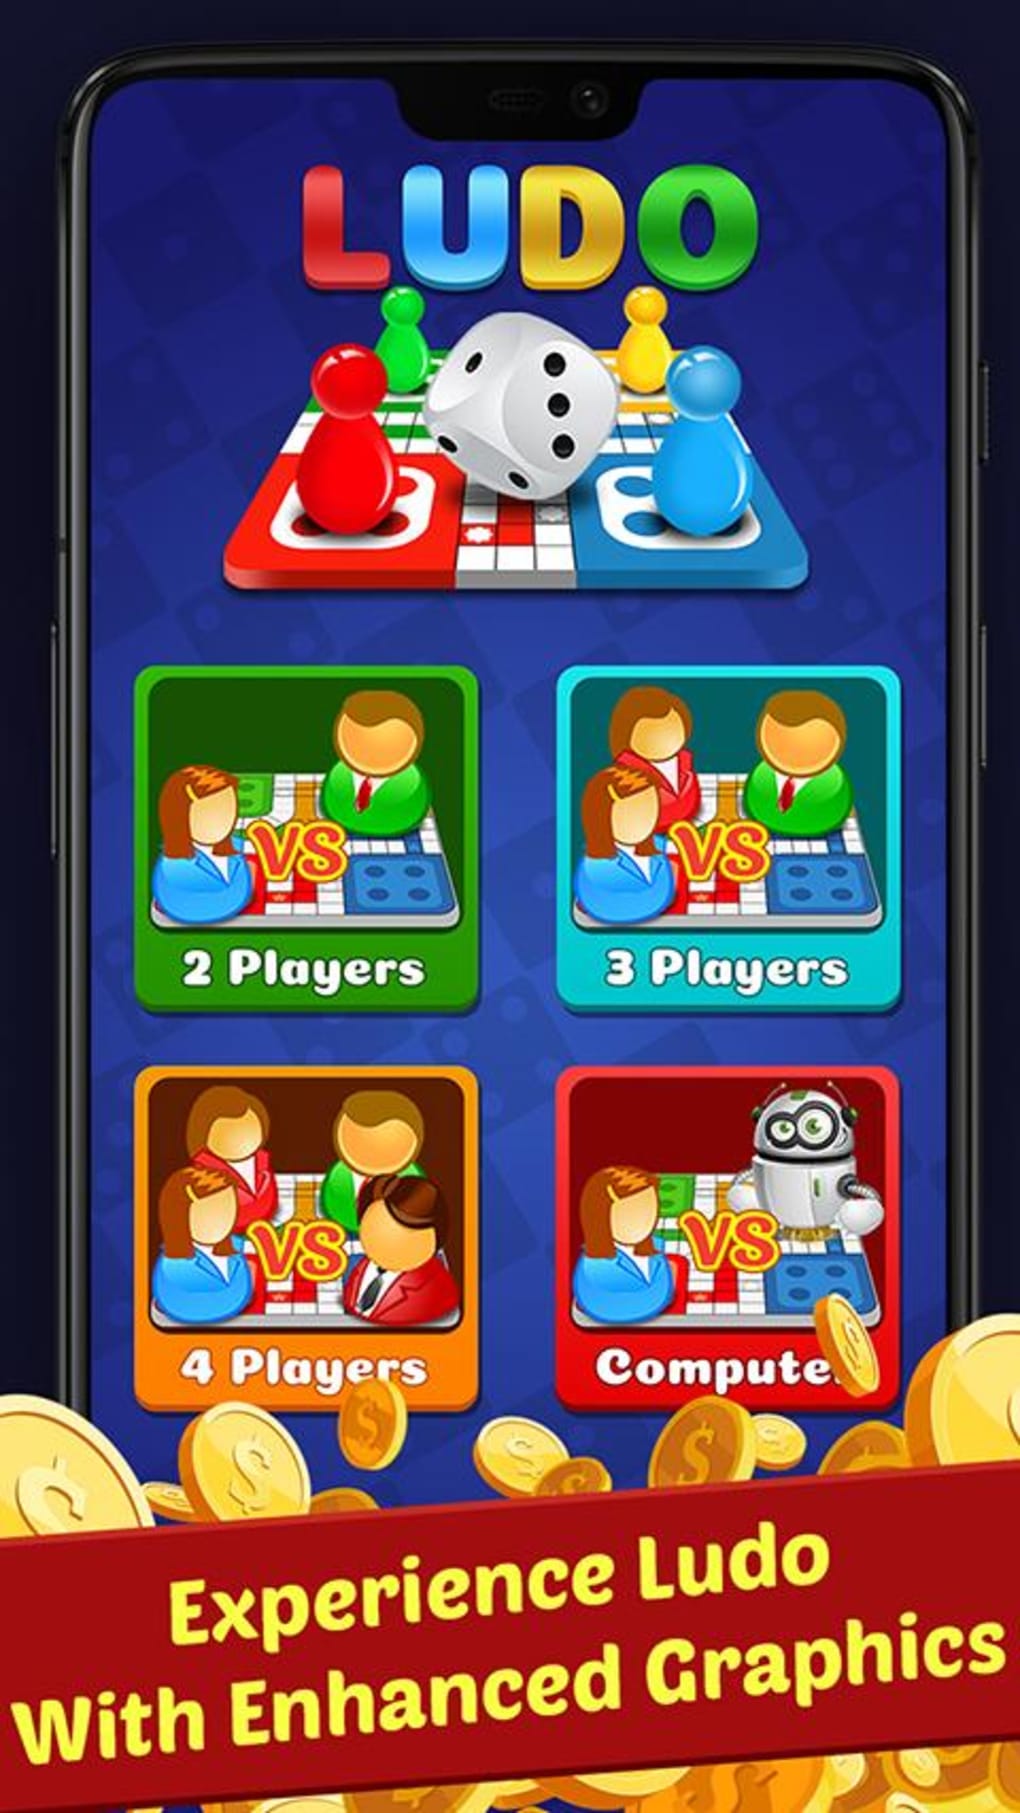 Brwanjeya - Mills Games Online - APK Download for Android